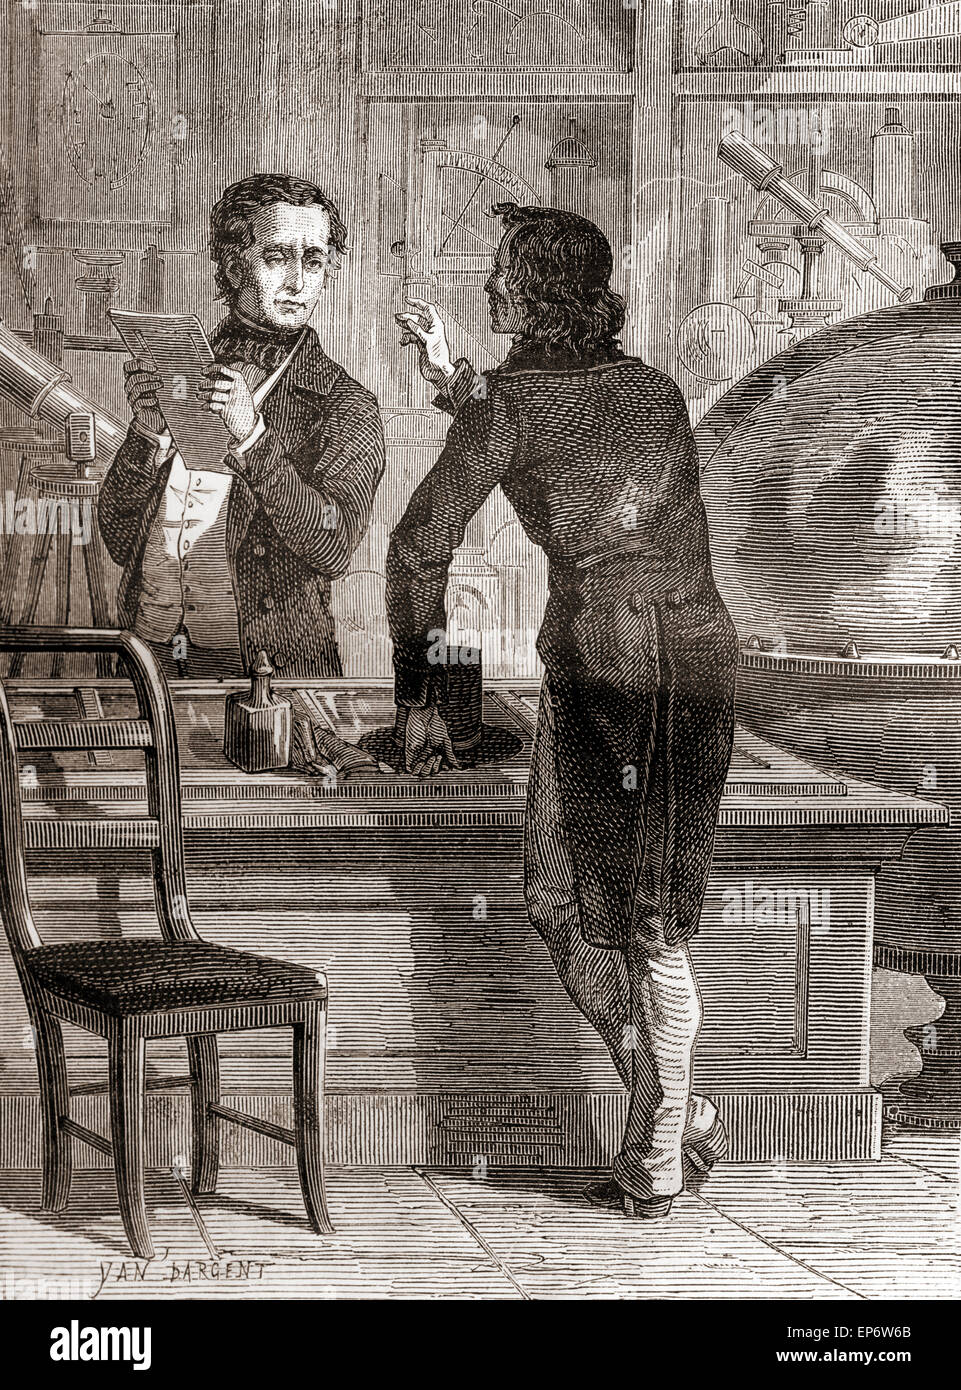 Nicéphore Niépce, whilst still unknown and poor, in Charles Chevalier's optical and instruments shop.  Charles Louis Chevalier, 1804- 1859. French engineer/optician.  Nicéphore Niépce, born Joseph Niépce,1765 – 1833. French inventor of photography. Stock Photo